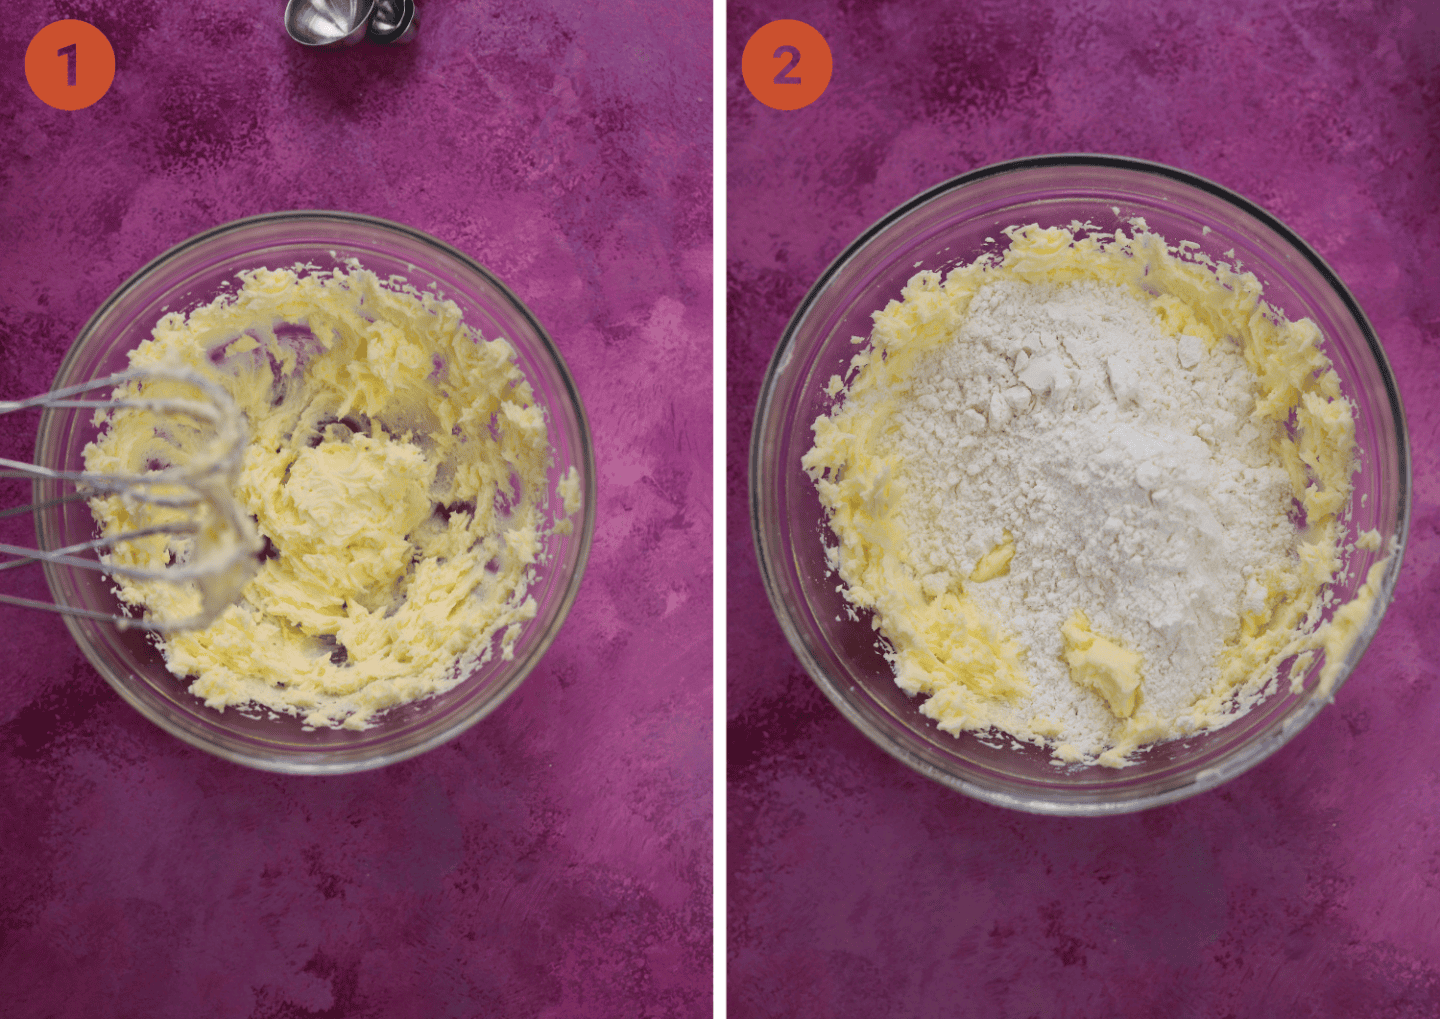 Cream the butter and sugar together and then add the gluten free flour.